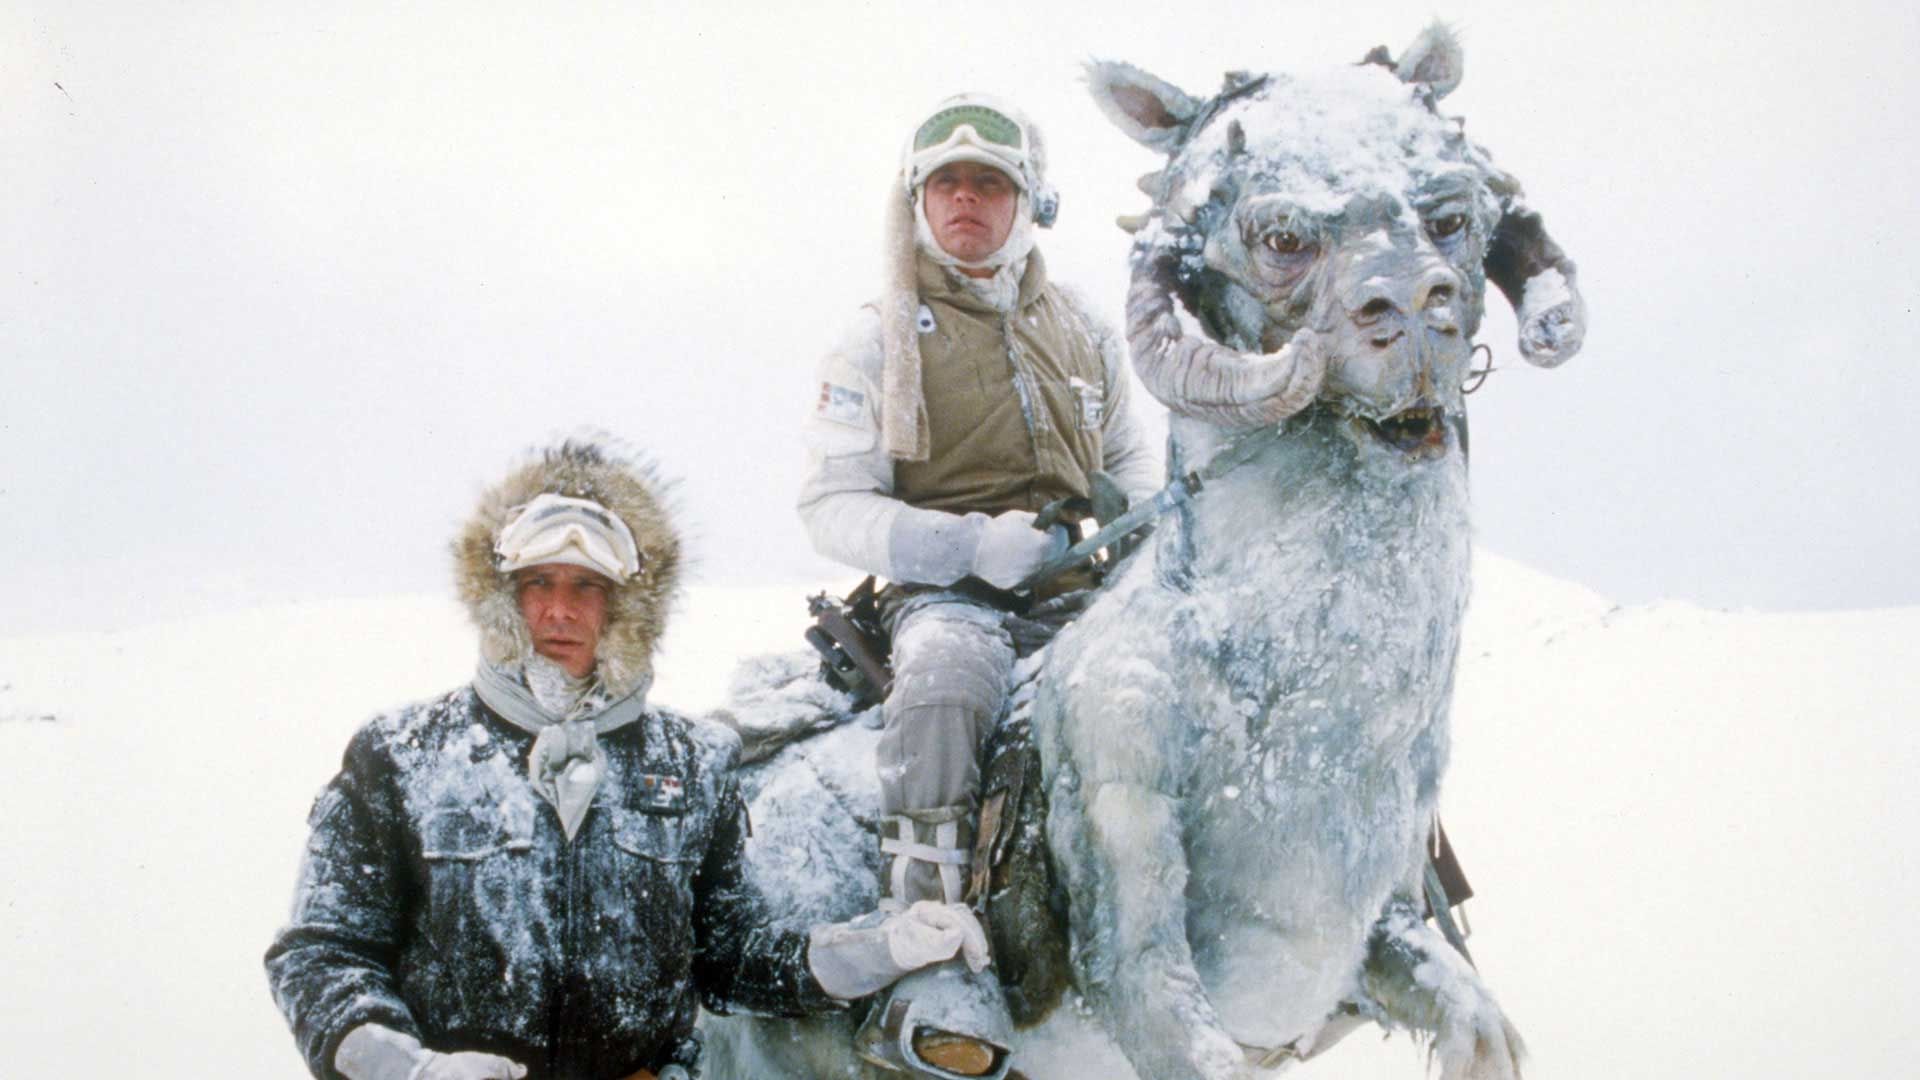 Save a Tauntaun, wear Columbia's new line of 'Star Wars' winter jackets instead. This is the Loop